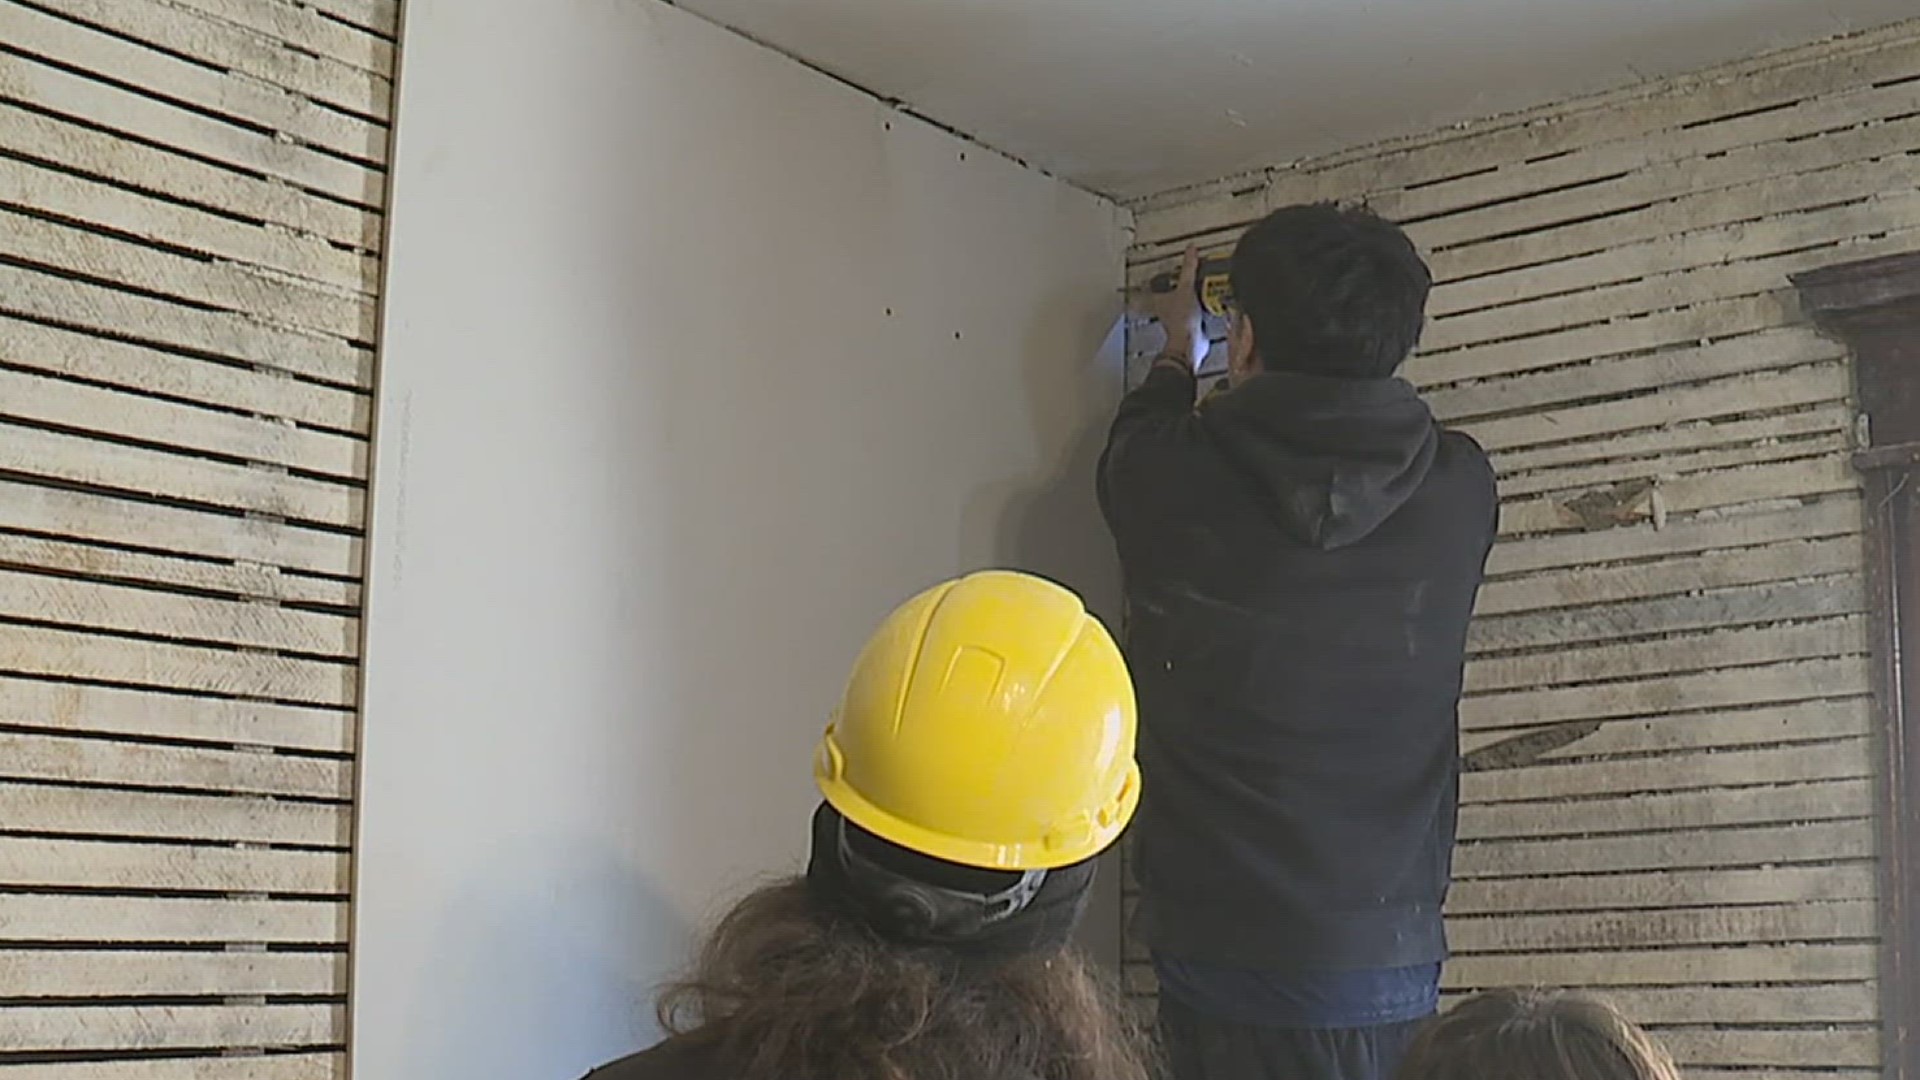 In collaboration with Project Now, YouthBuild Quad Cities will bring together local students to refurbish new homes for domestic violence survivors.